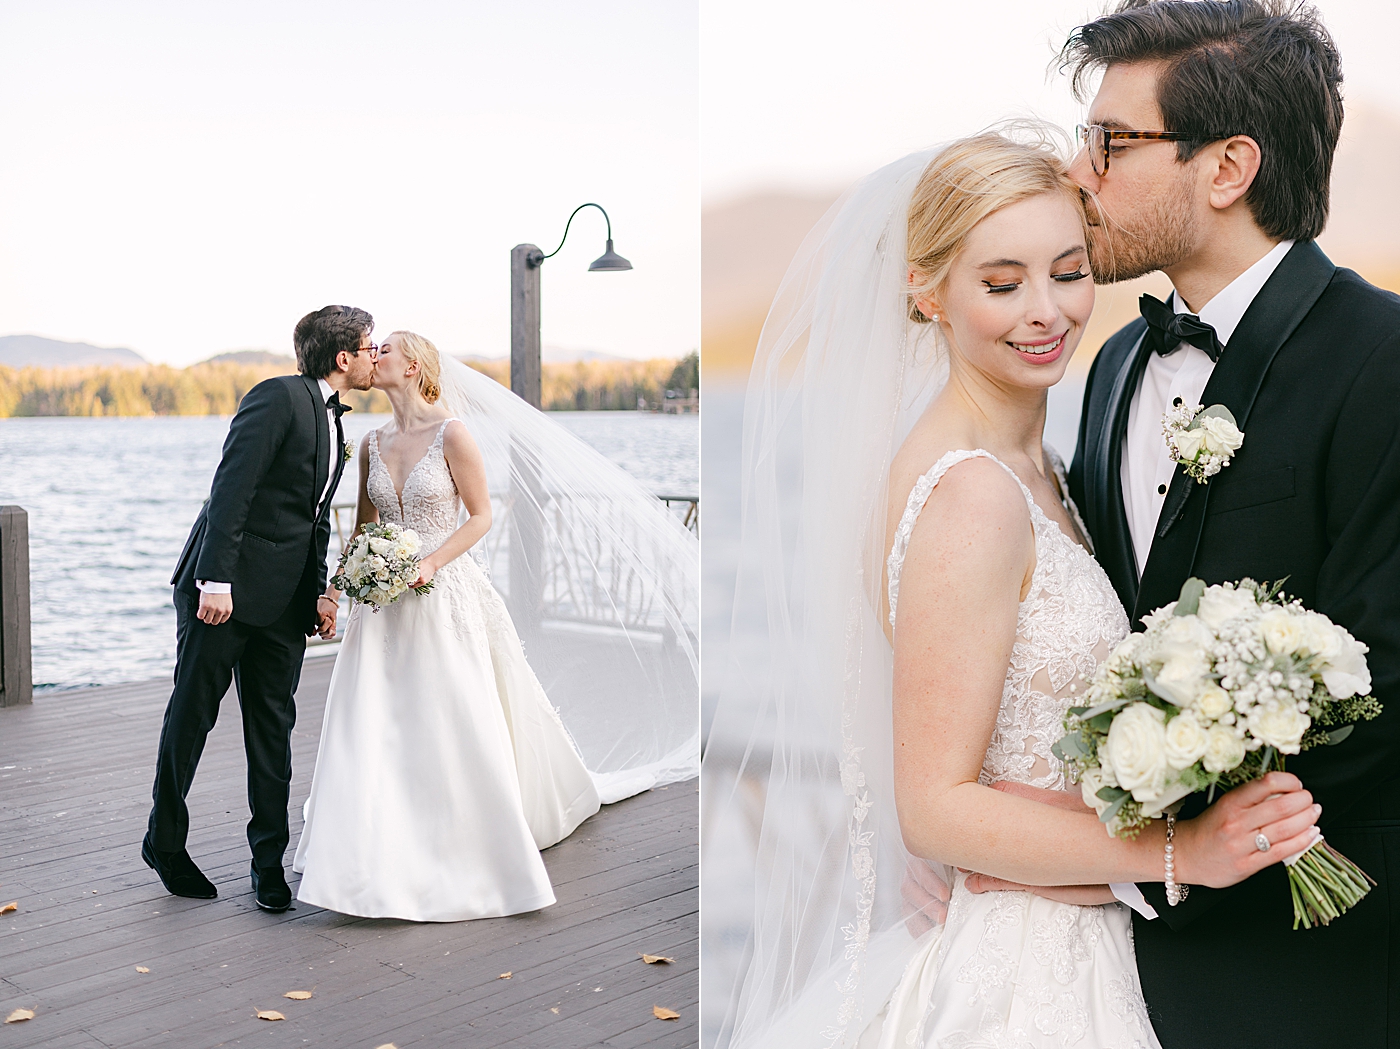 Bride and groom kissing on a dock | Image by Hope Helmuth Photography